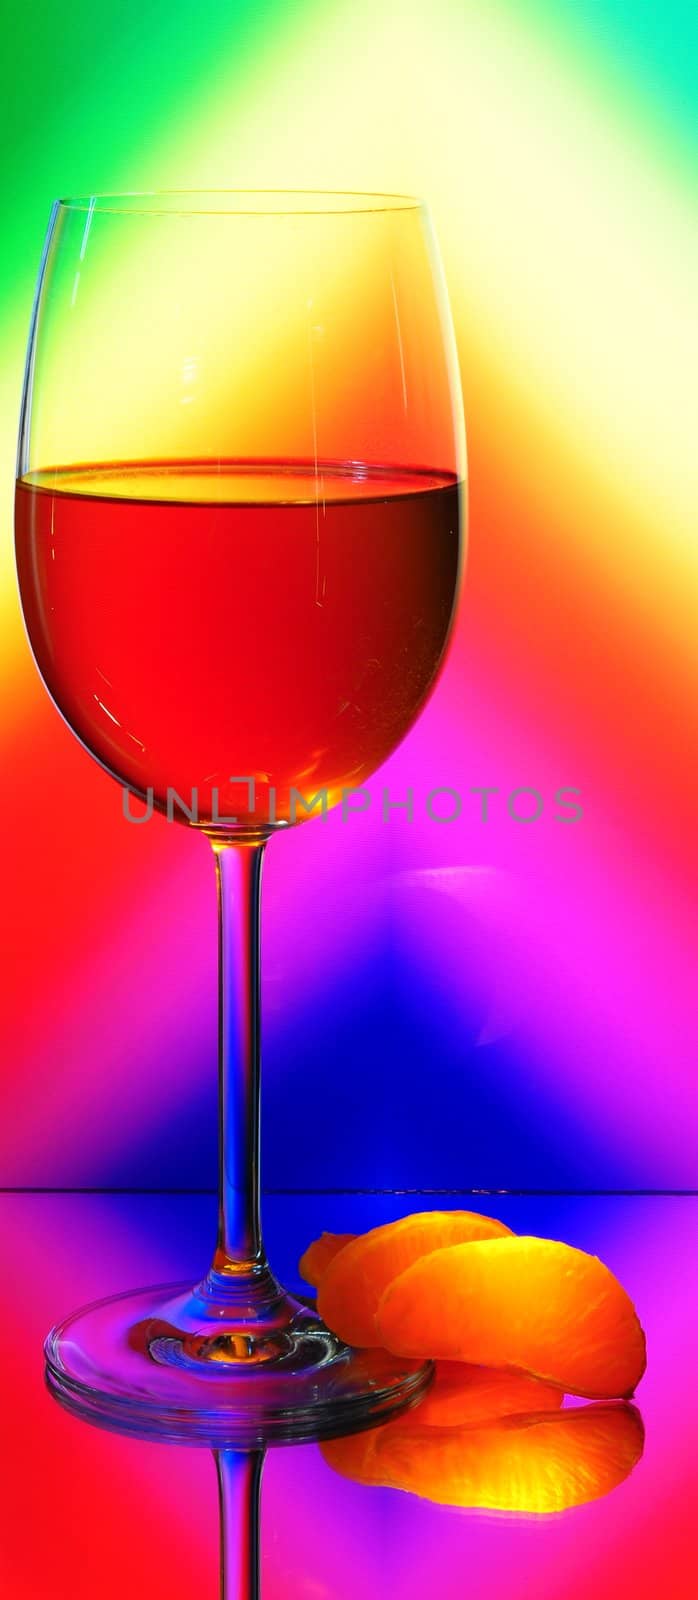  Elegant Tall Wineglass For Red Wine And Segments Of Mandarin  Over Motley  Background.